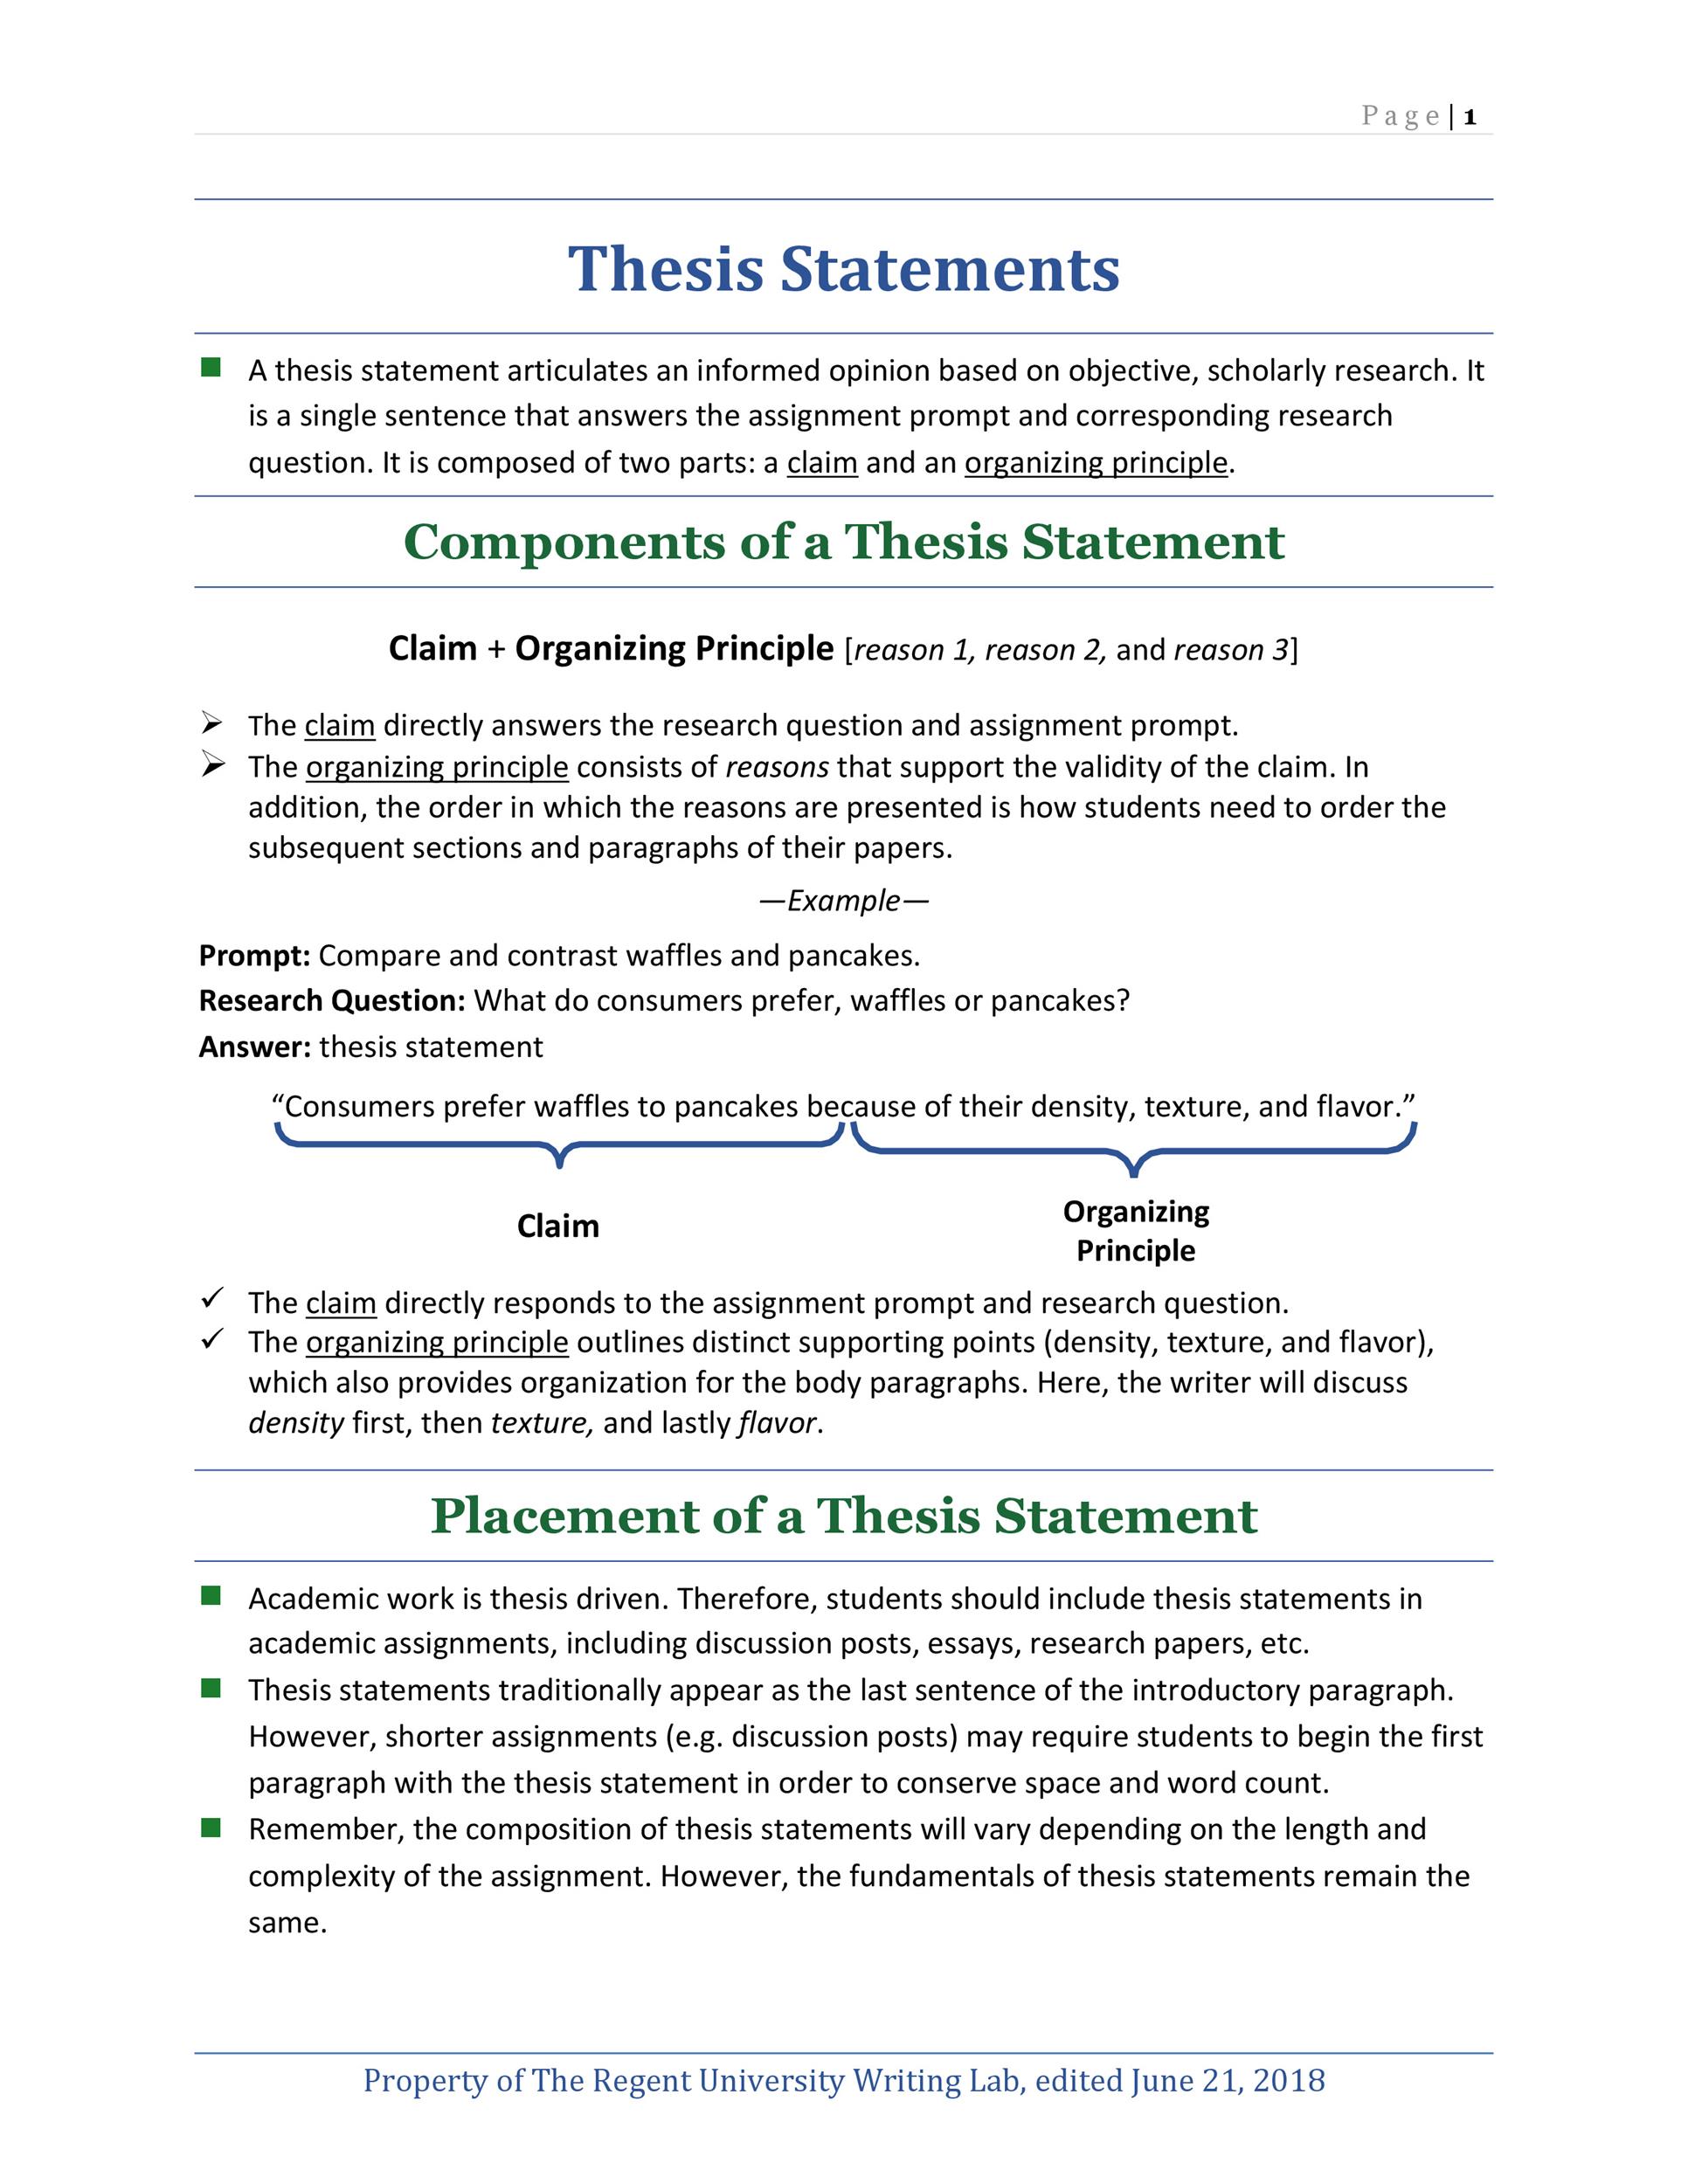 justification of thesis statement